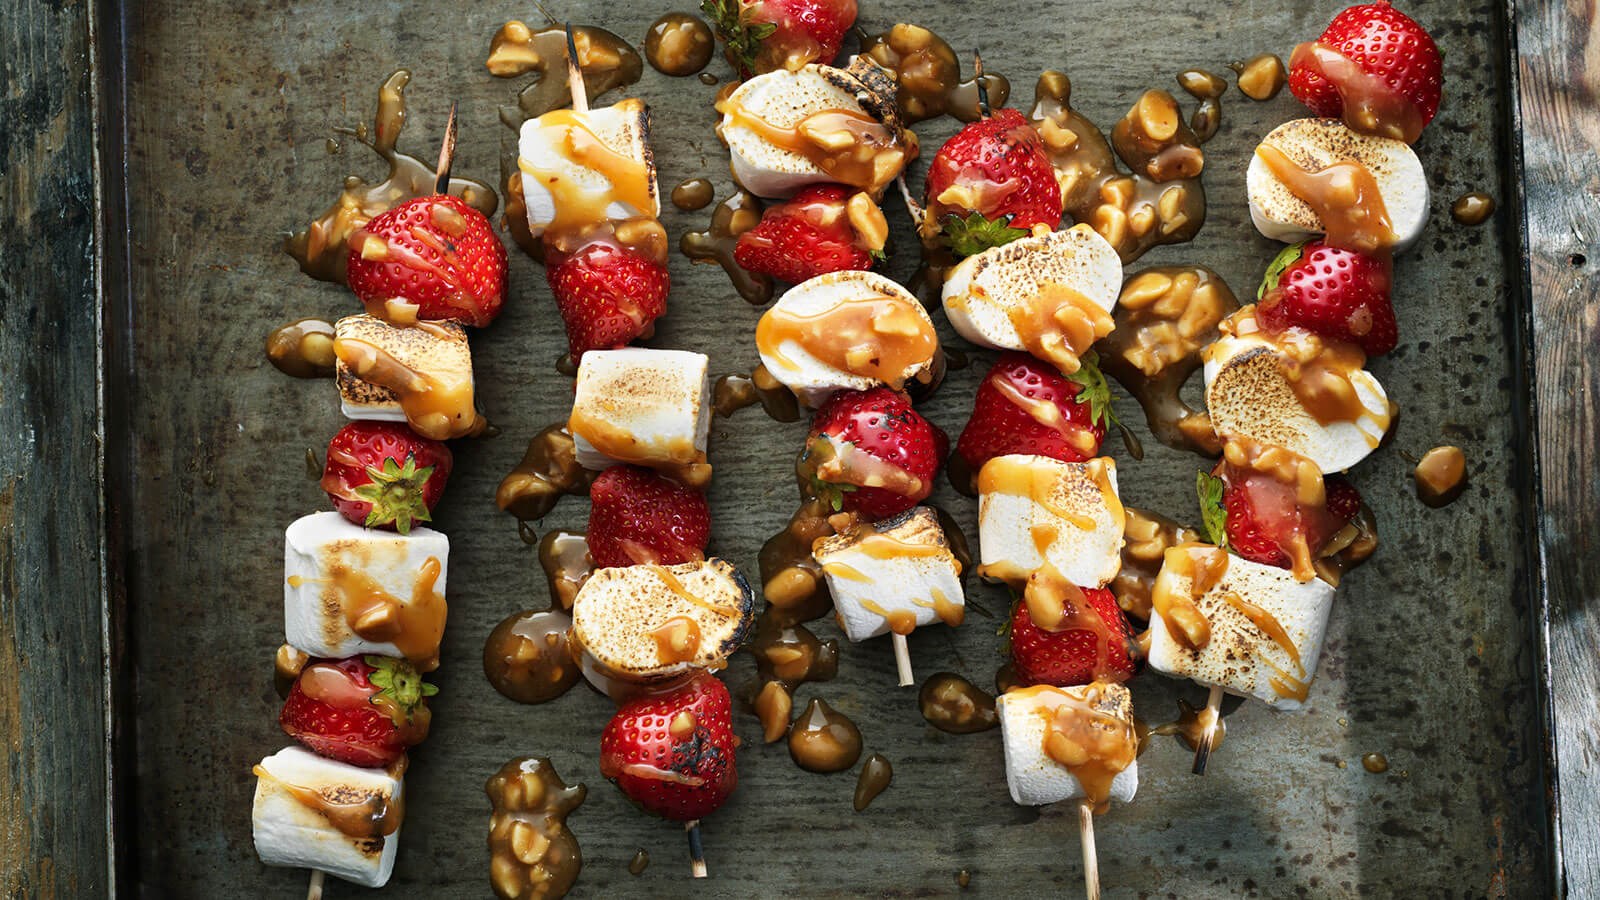 Skewers with strawberries and marshmallows drizzled with caramel sauce